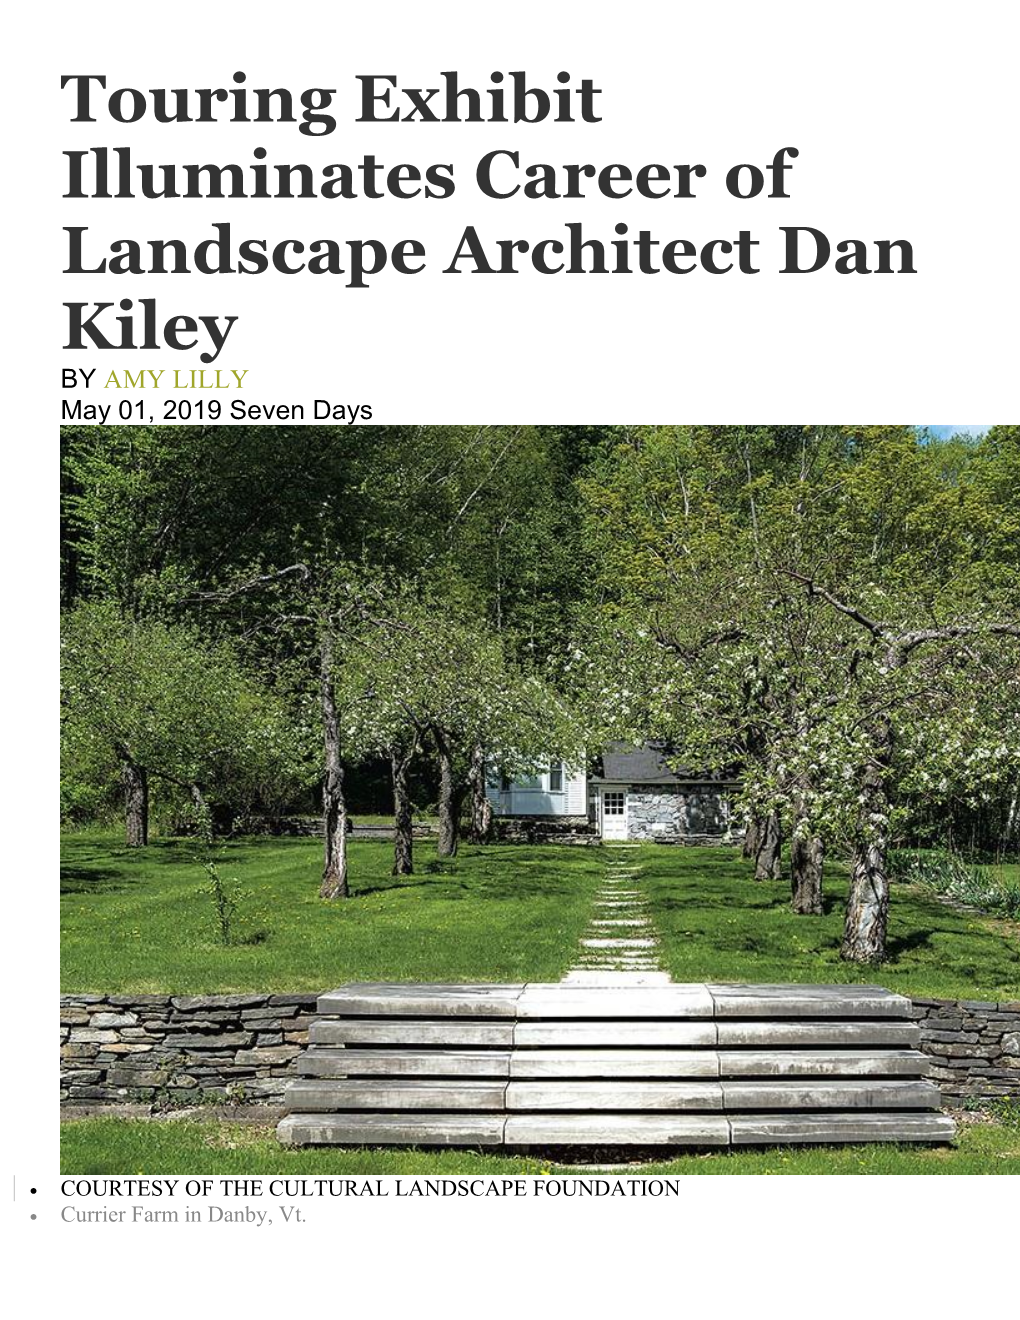 Touring Exhibit Illuminates Career of Landscape Architect Dan Kiley by AMY LILLY May 01, 2019 Seven Days